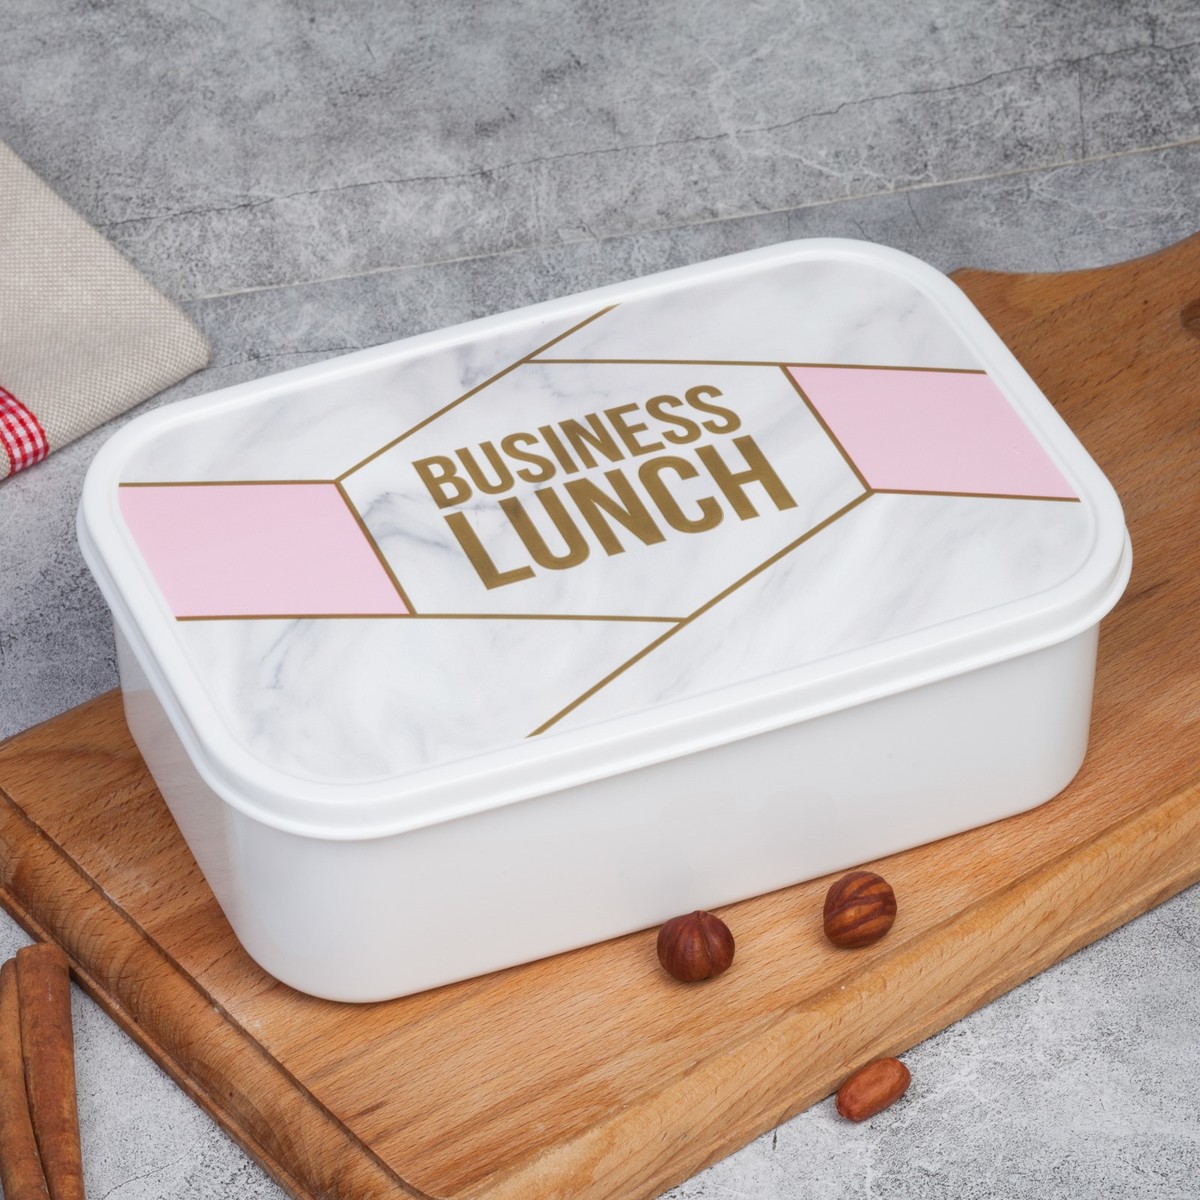 Ланч-бокс business lunch, 1.2 л business stripped bare